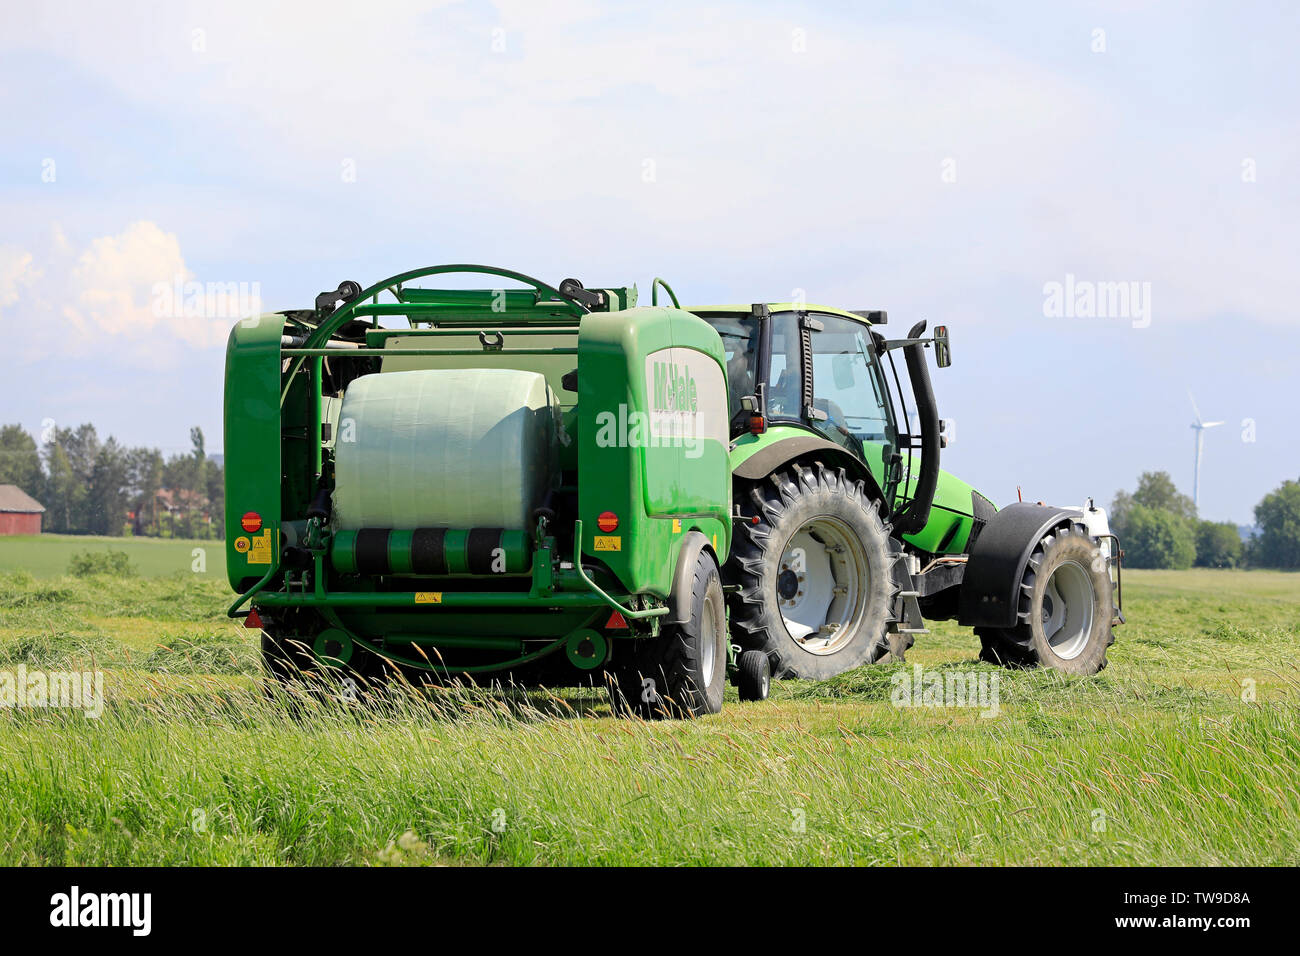 Salo, Finland. June 15, 2019. Deutz-Fahr tractor and McHale 3 plus baler baling silage in green plastic sheet in hay field on a sunny day of summer. Stock Photo